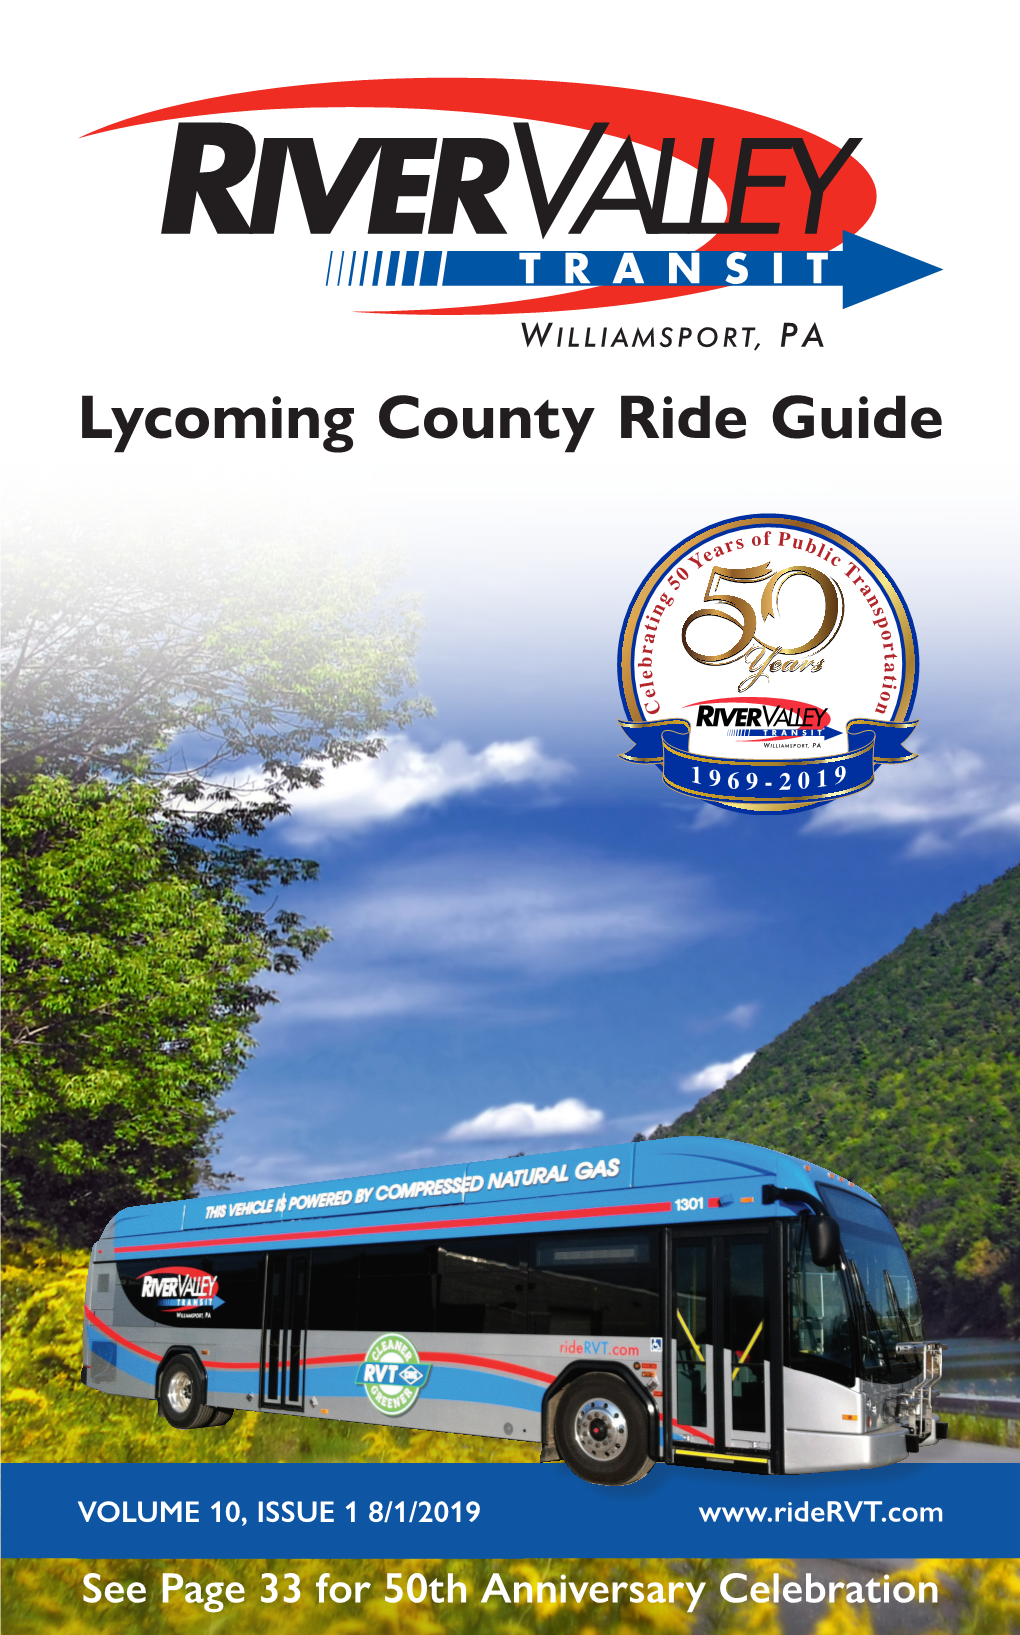 Lycoming County Ride Guide